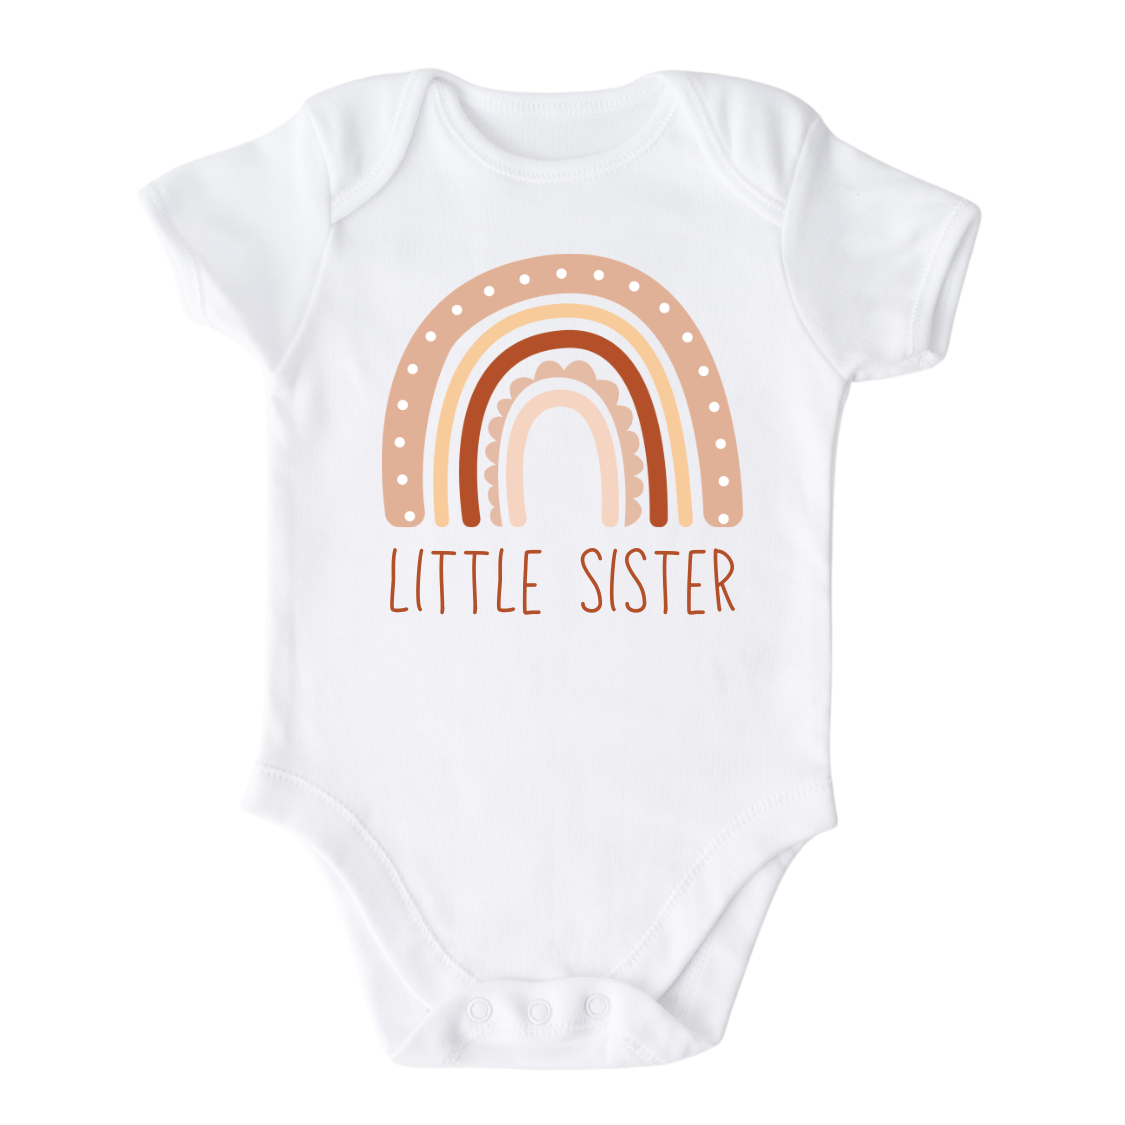 Baby Onesie with a cute printed design of a rainbow, customizable with the text 'Little Sister'.